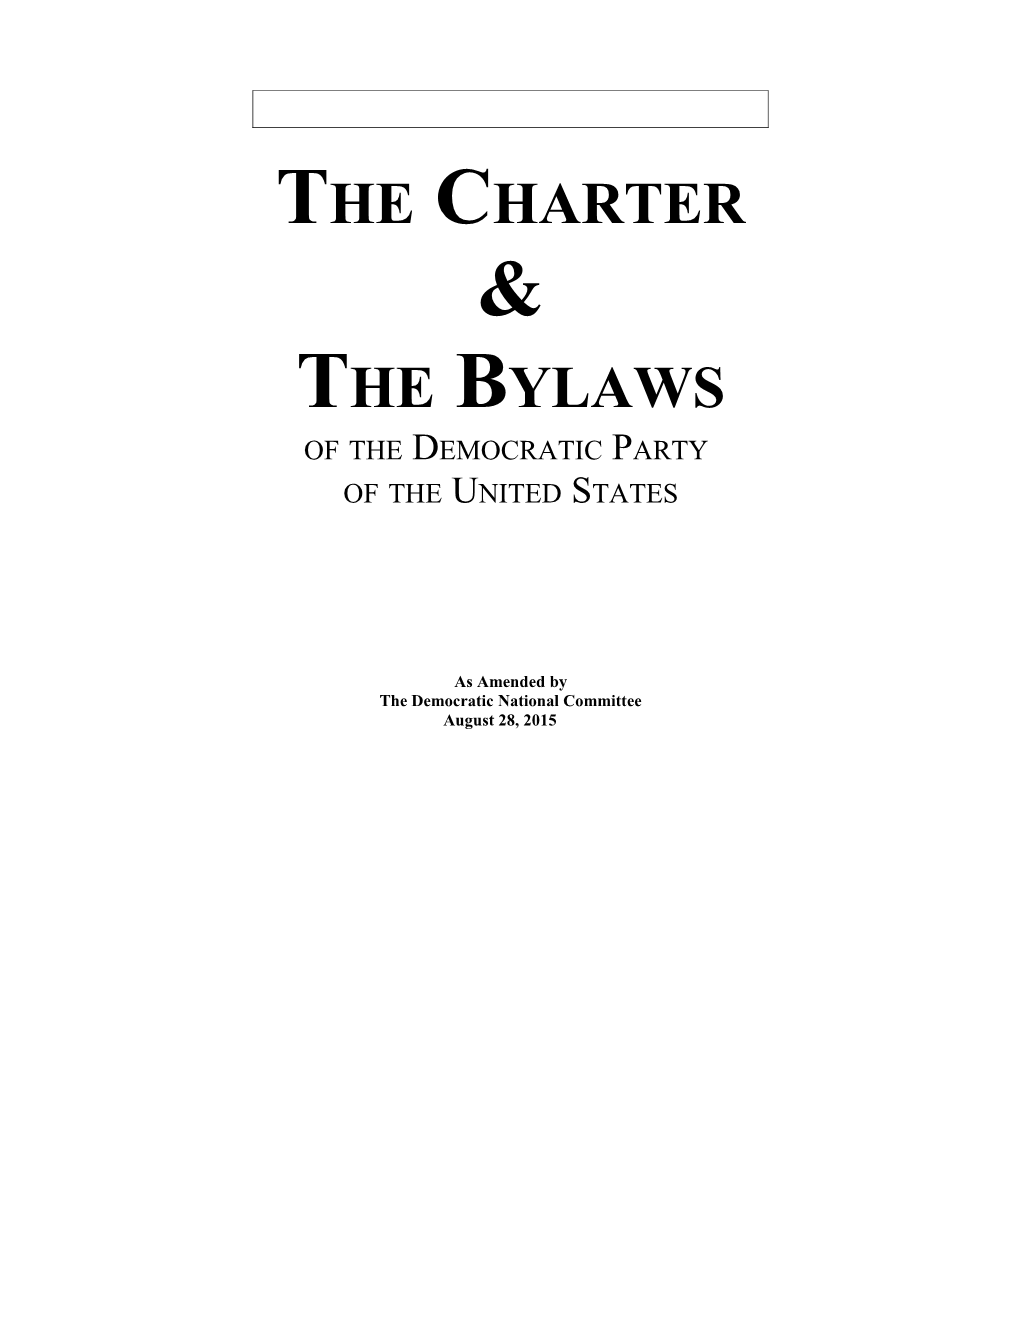 Charter of the Democratic Party of the United States